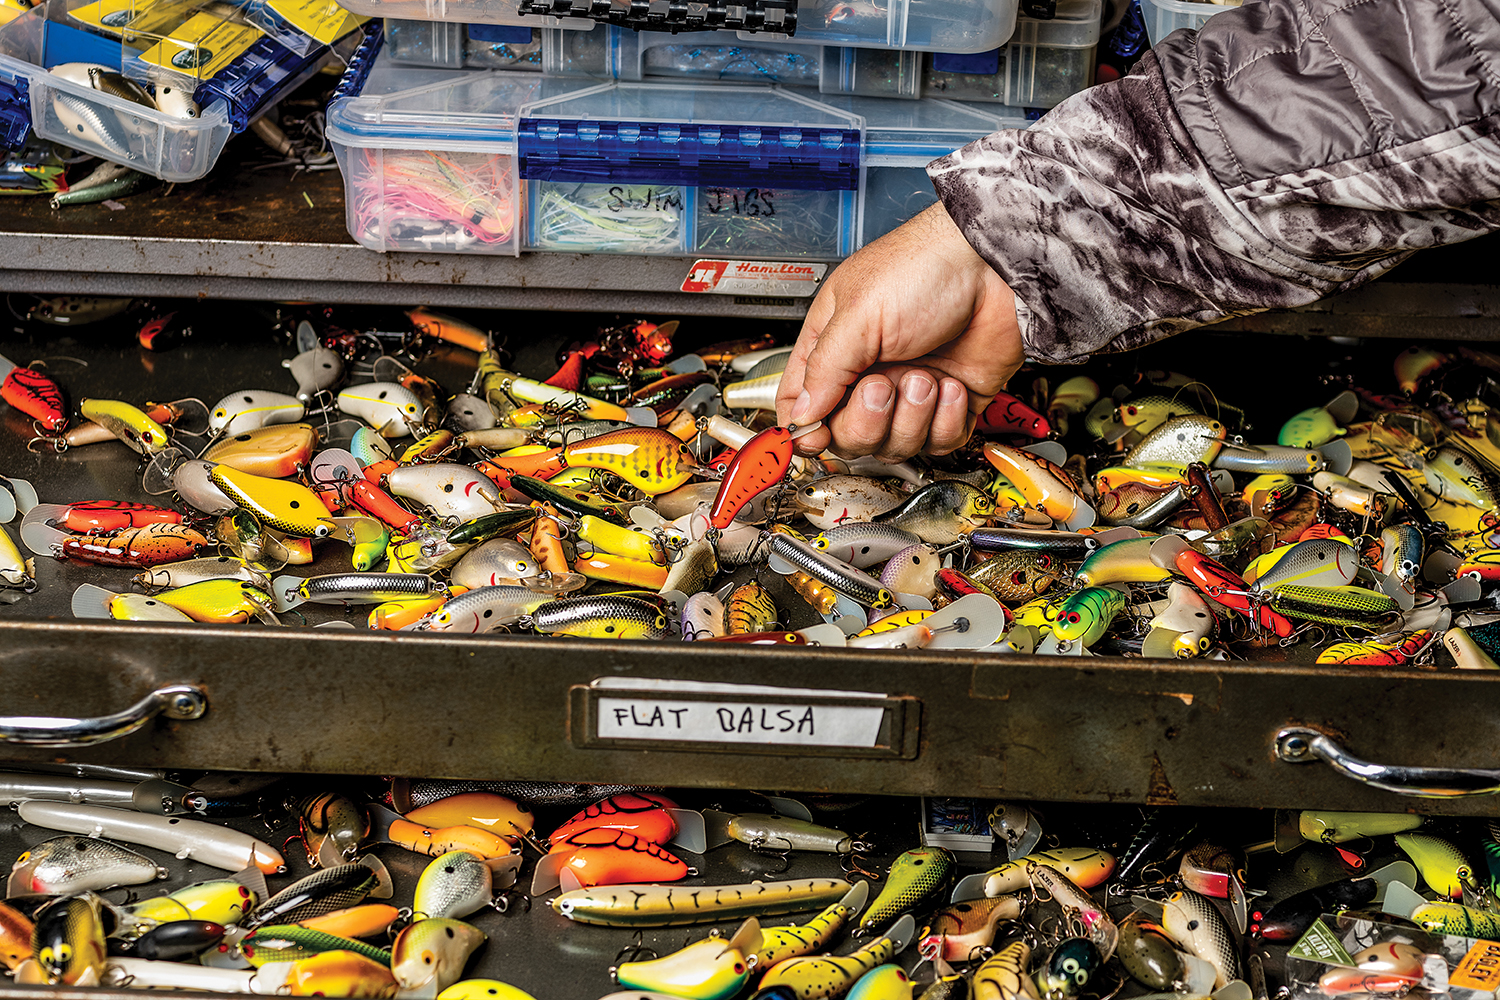 hand reaches into a drawer full of fishing lures; label reads "flat balsa"